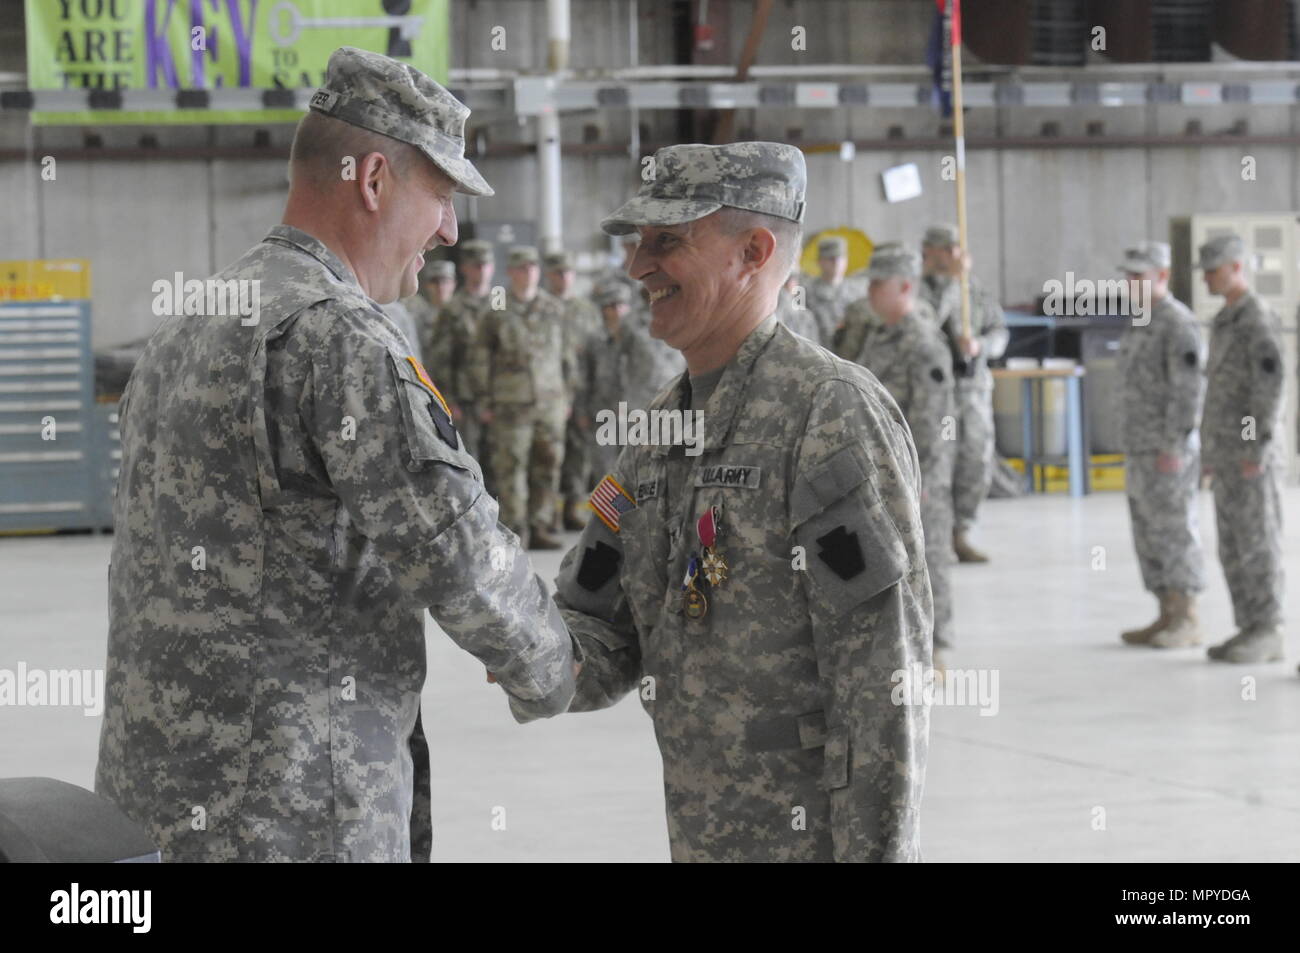 U.S. Army Col. Dennis Sorensen, right, outgoing commander of the 28th Combat Aviation Brigade, shakes hands with Brig. Gen. Andrew Schafer, commander of the 28th Infantry Division during a change of command ceremony at Muir Army Airfield, April 23, 2017. Sorensen was recognized for his service and moves on after 29 years in the 28th CAB. Stock Photo